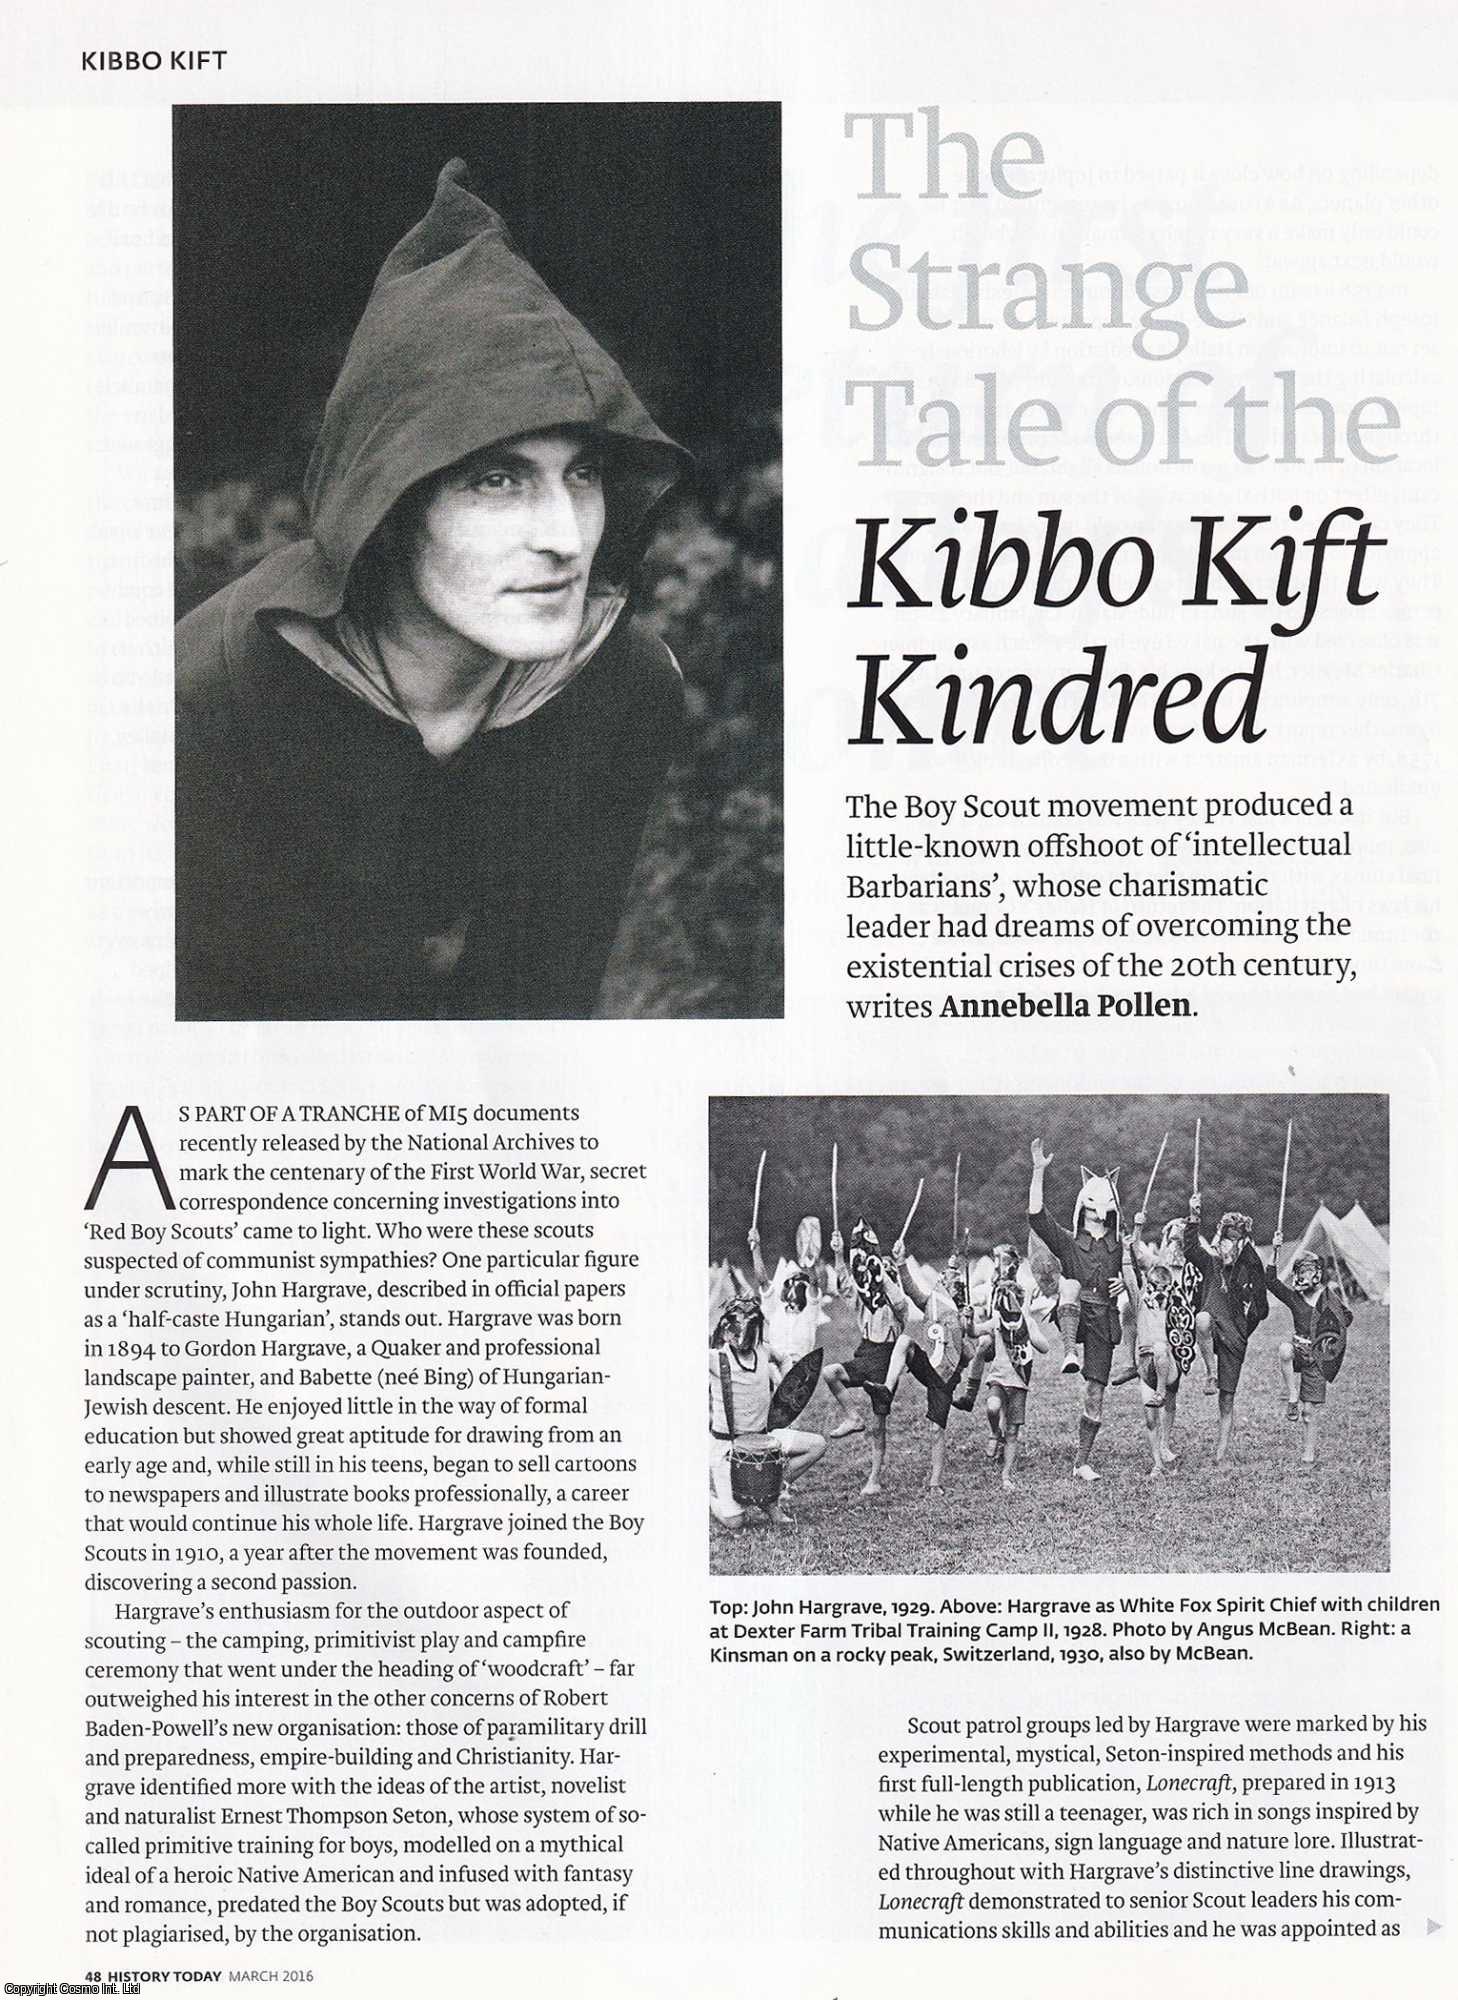 Annebella Pollen - The Strange Tale of the Kibbo Kift Kindred; Offshoot of the Boy Scouts. An original article from History Today magazine, 2016.